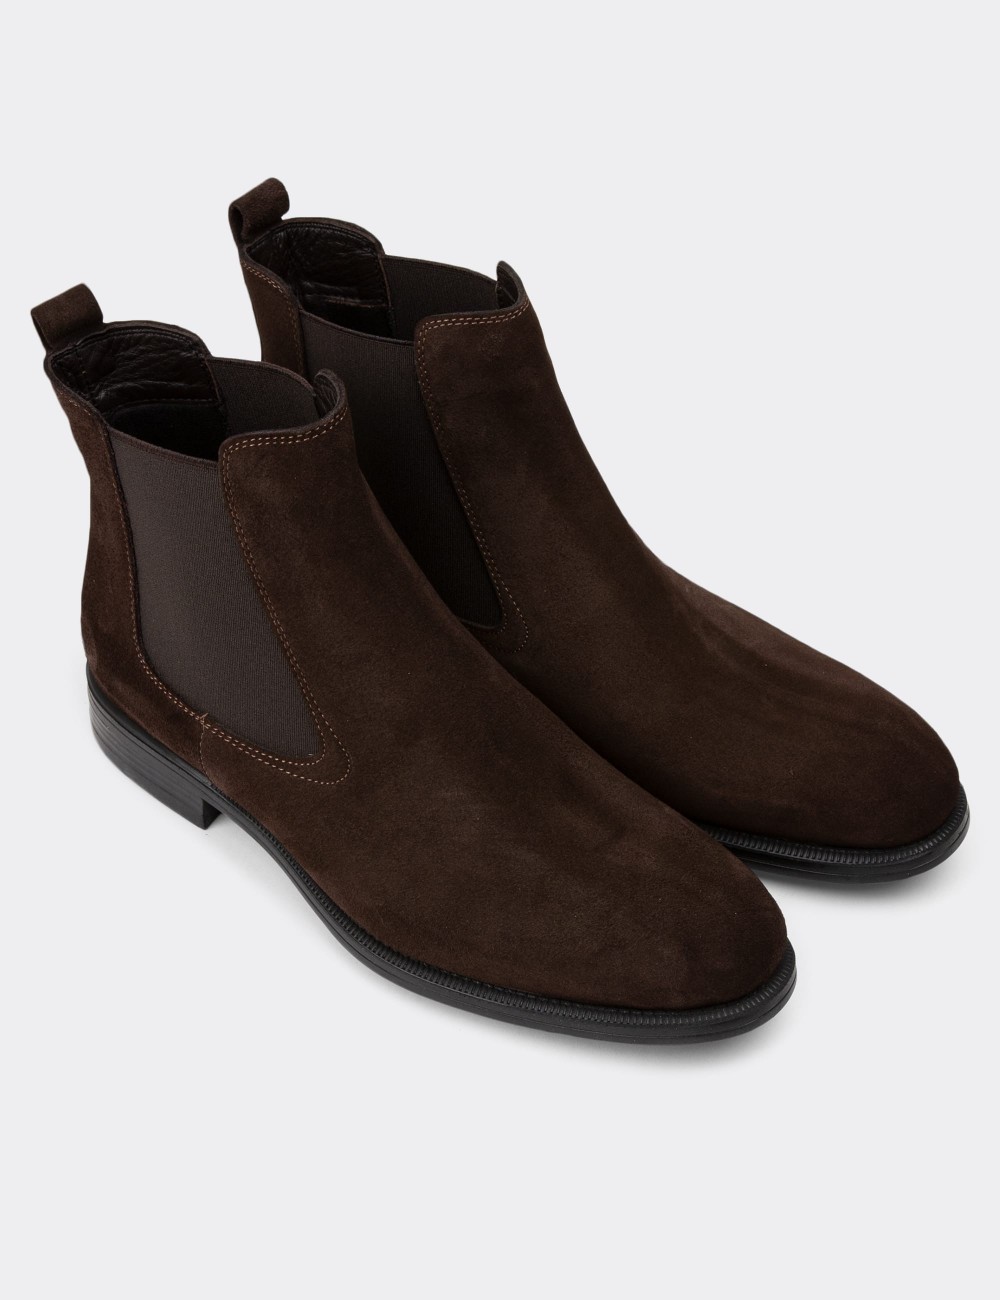 Brown Suede Leather Chelsea Boots - 01919MKHVC02